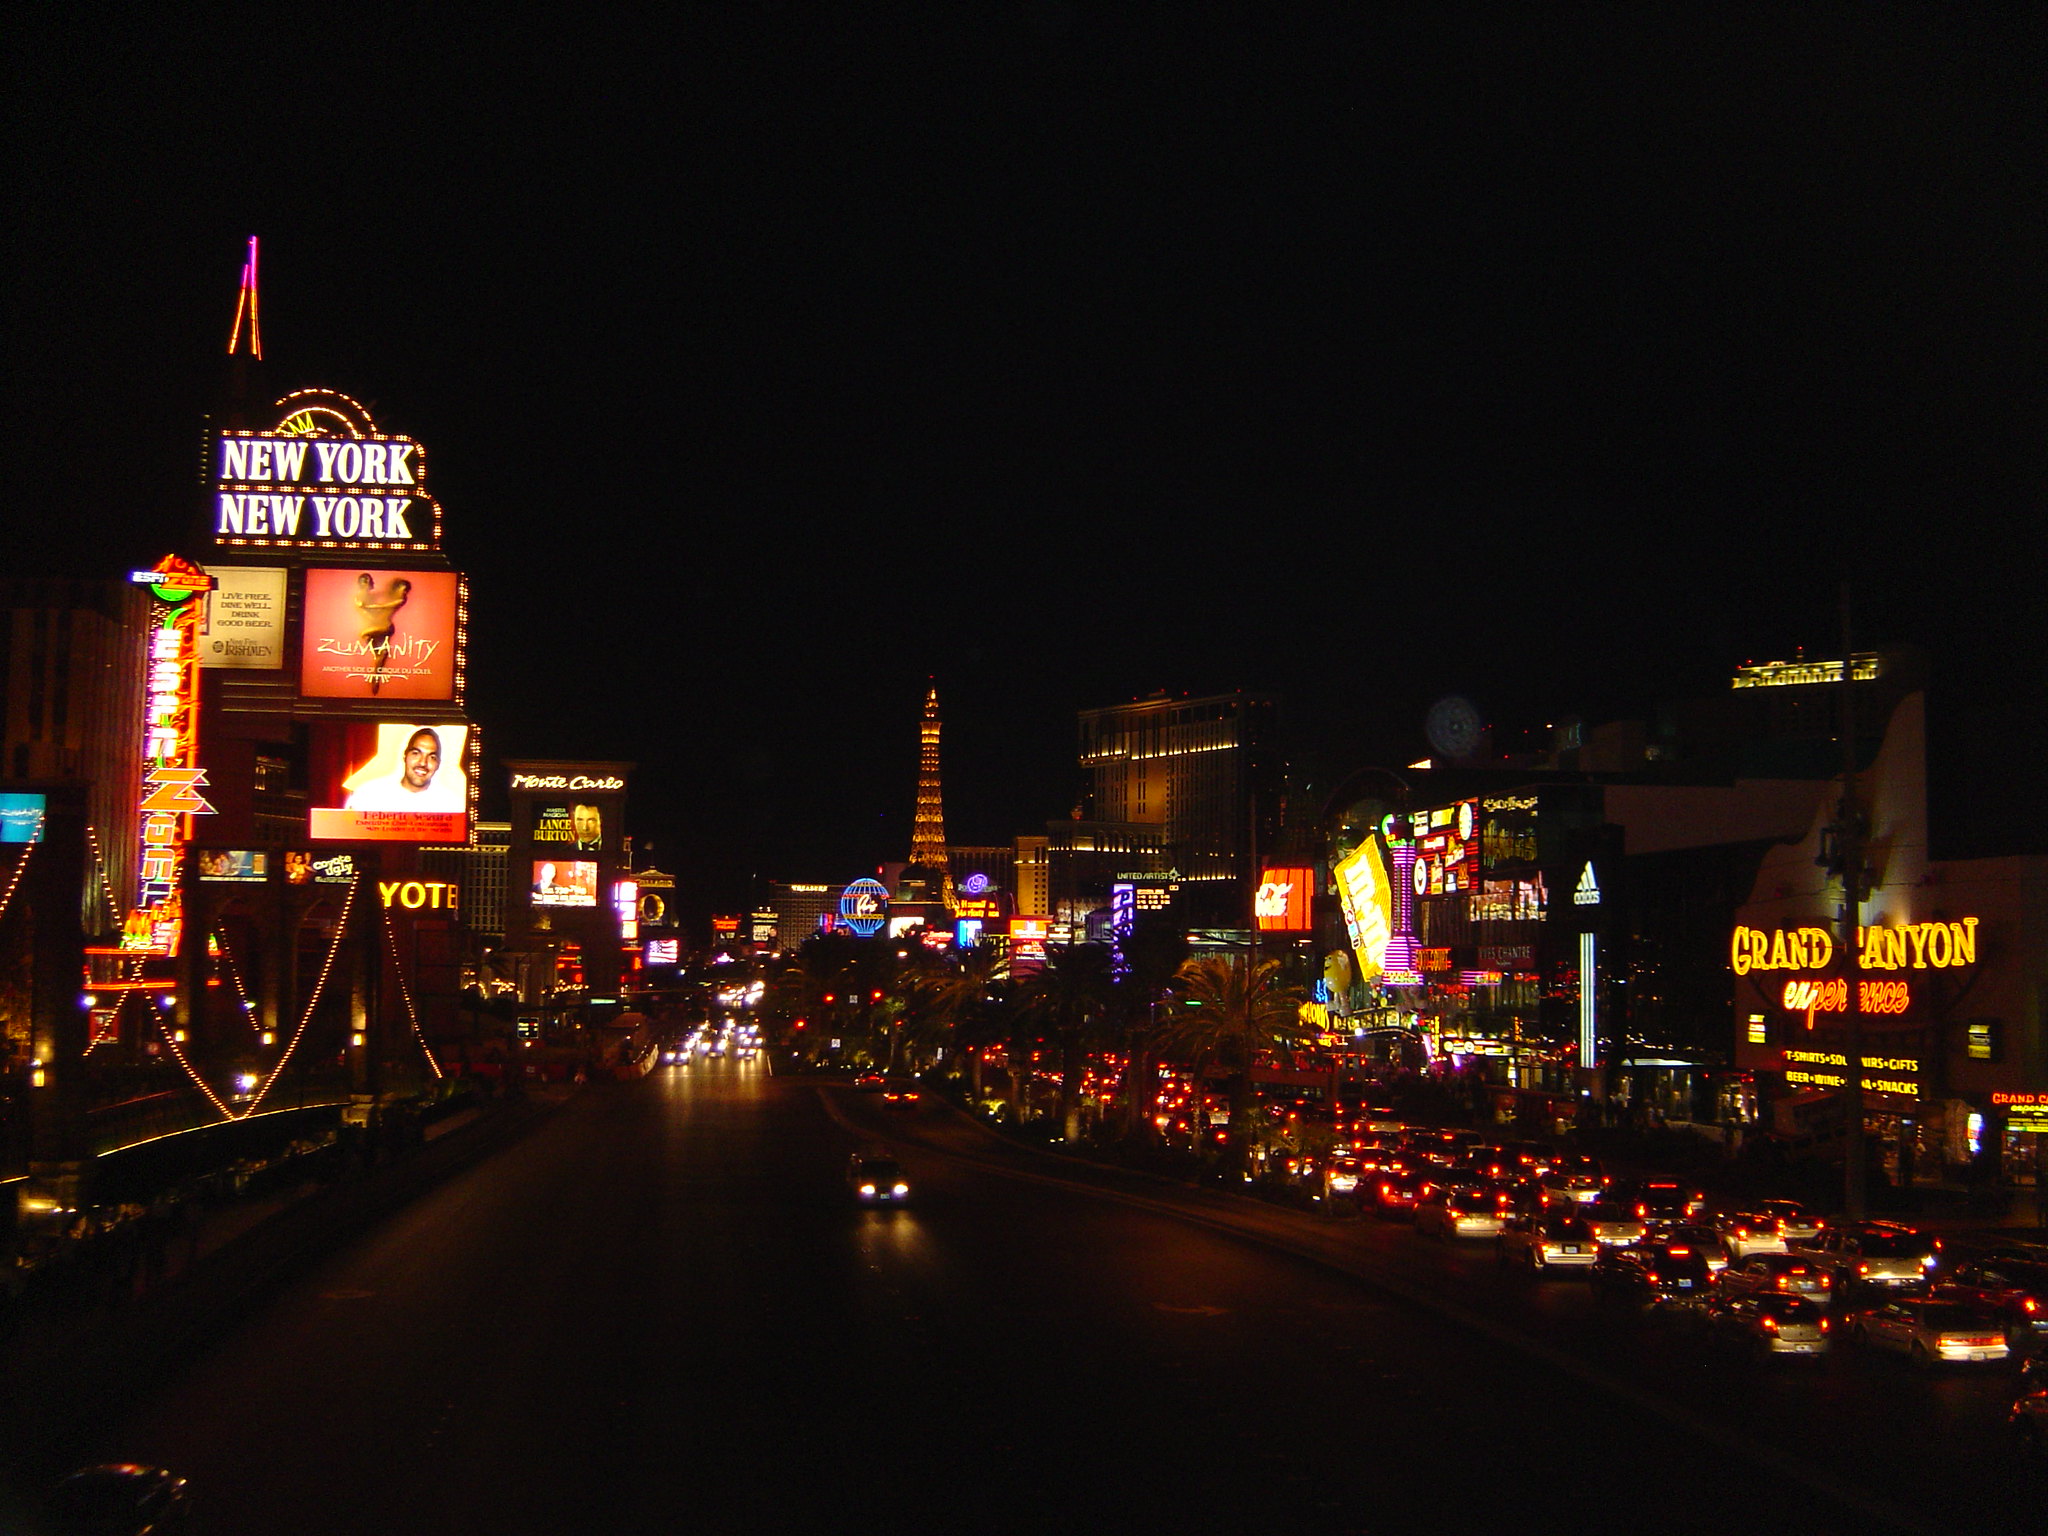 Another night time Las Vegas view